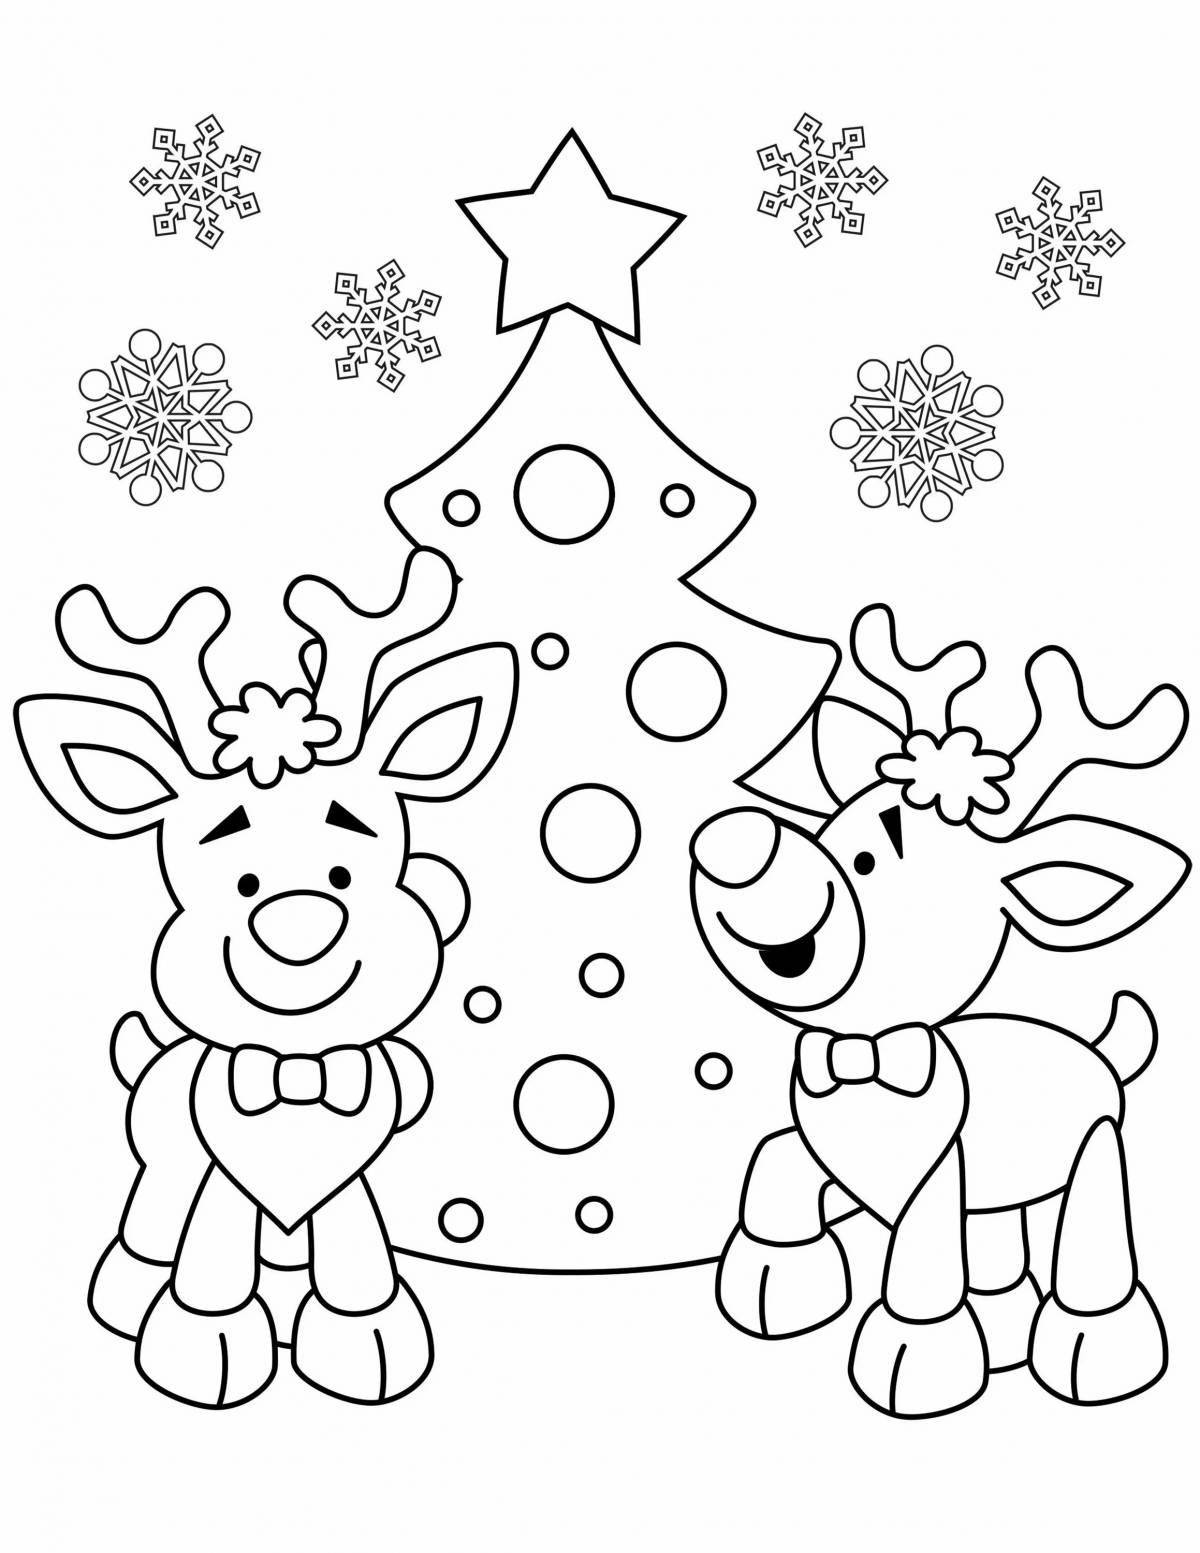 Easy Christmas coloring